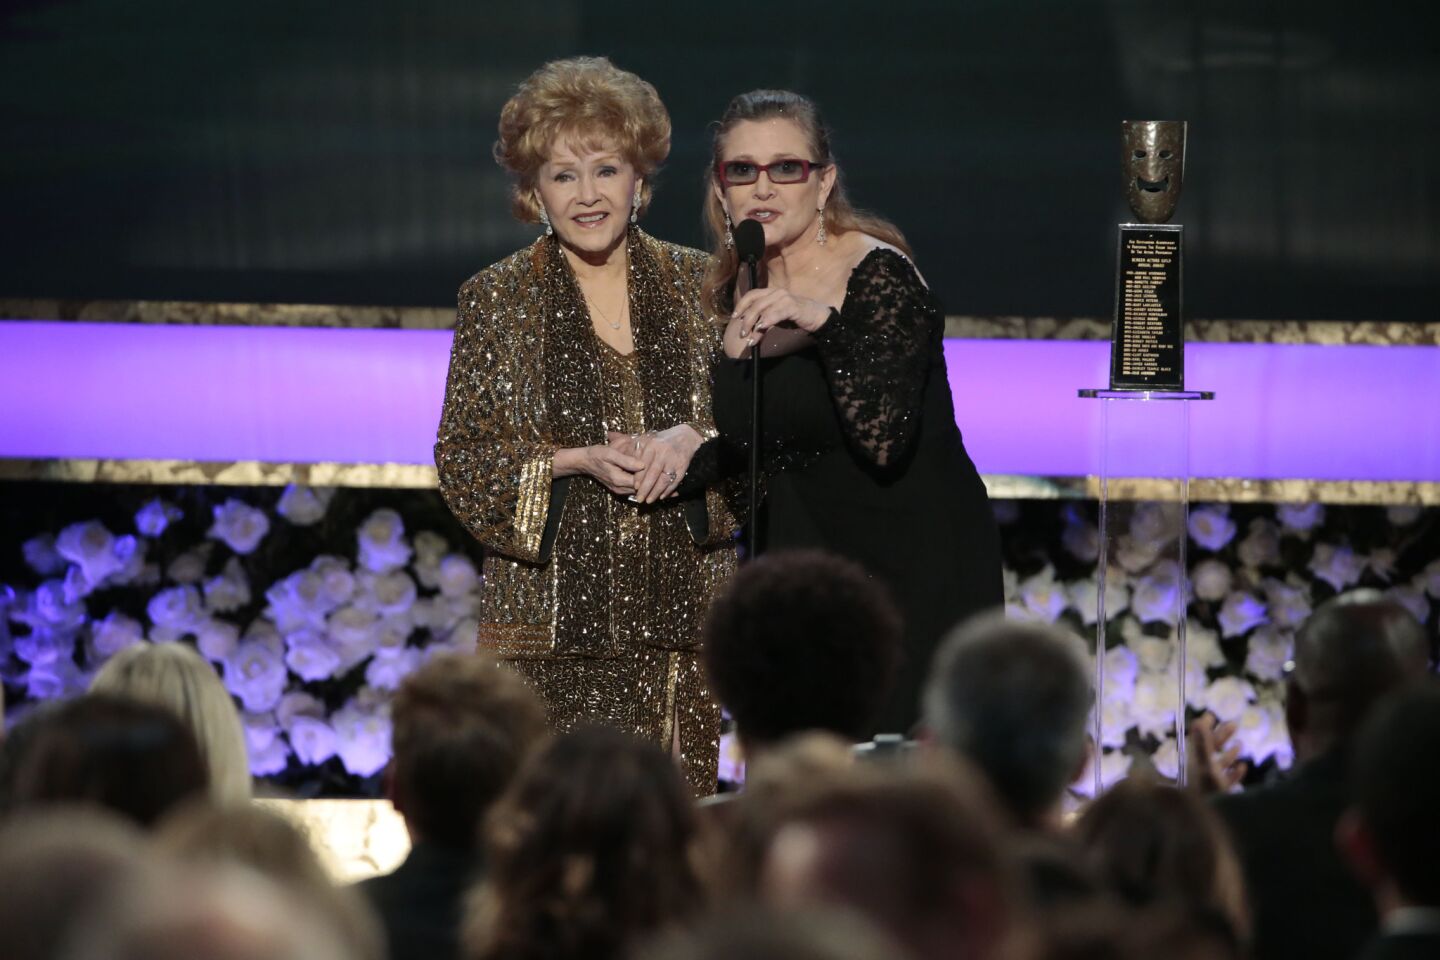 Carrie Fisher presents her mother, Debbie Reynolds, the Life Achievement Award at the 21st Screen Actors Guild Awards at the Shrine Auditorium in Los Angeles on Jan. 25, 2015.